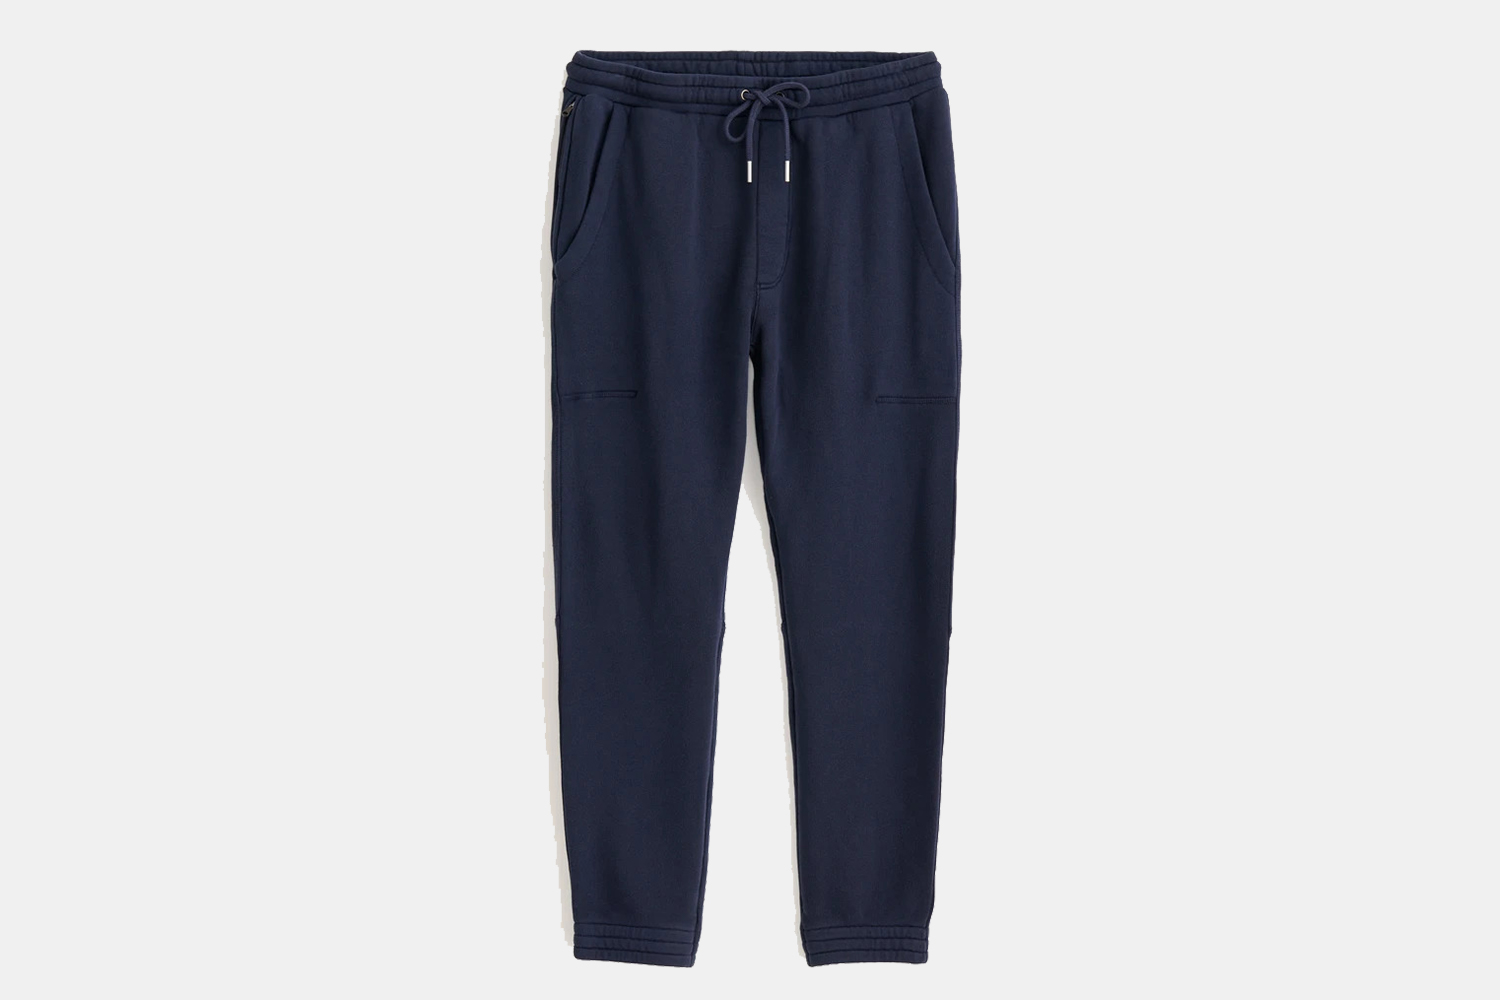 Alex Mill French Terry Sweatpants